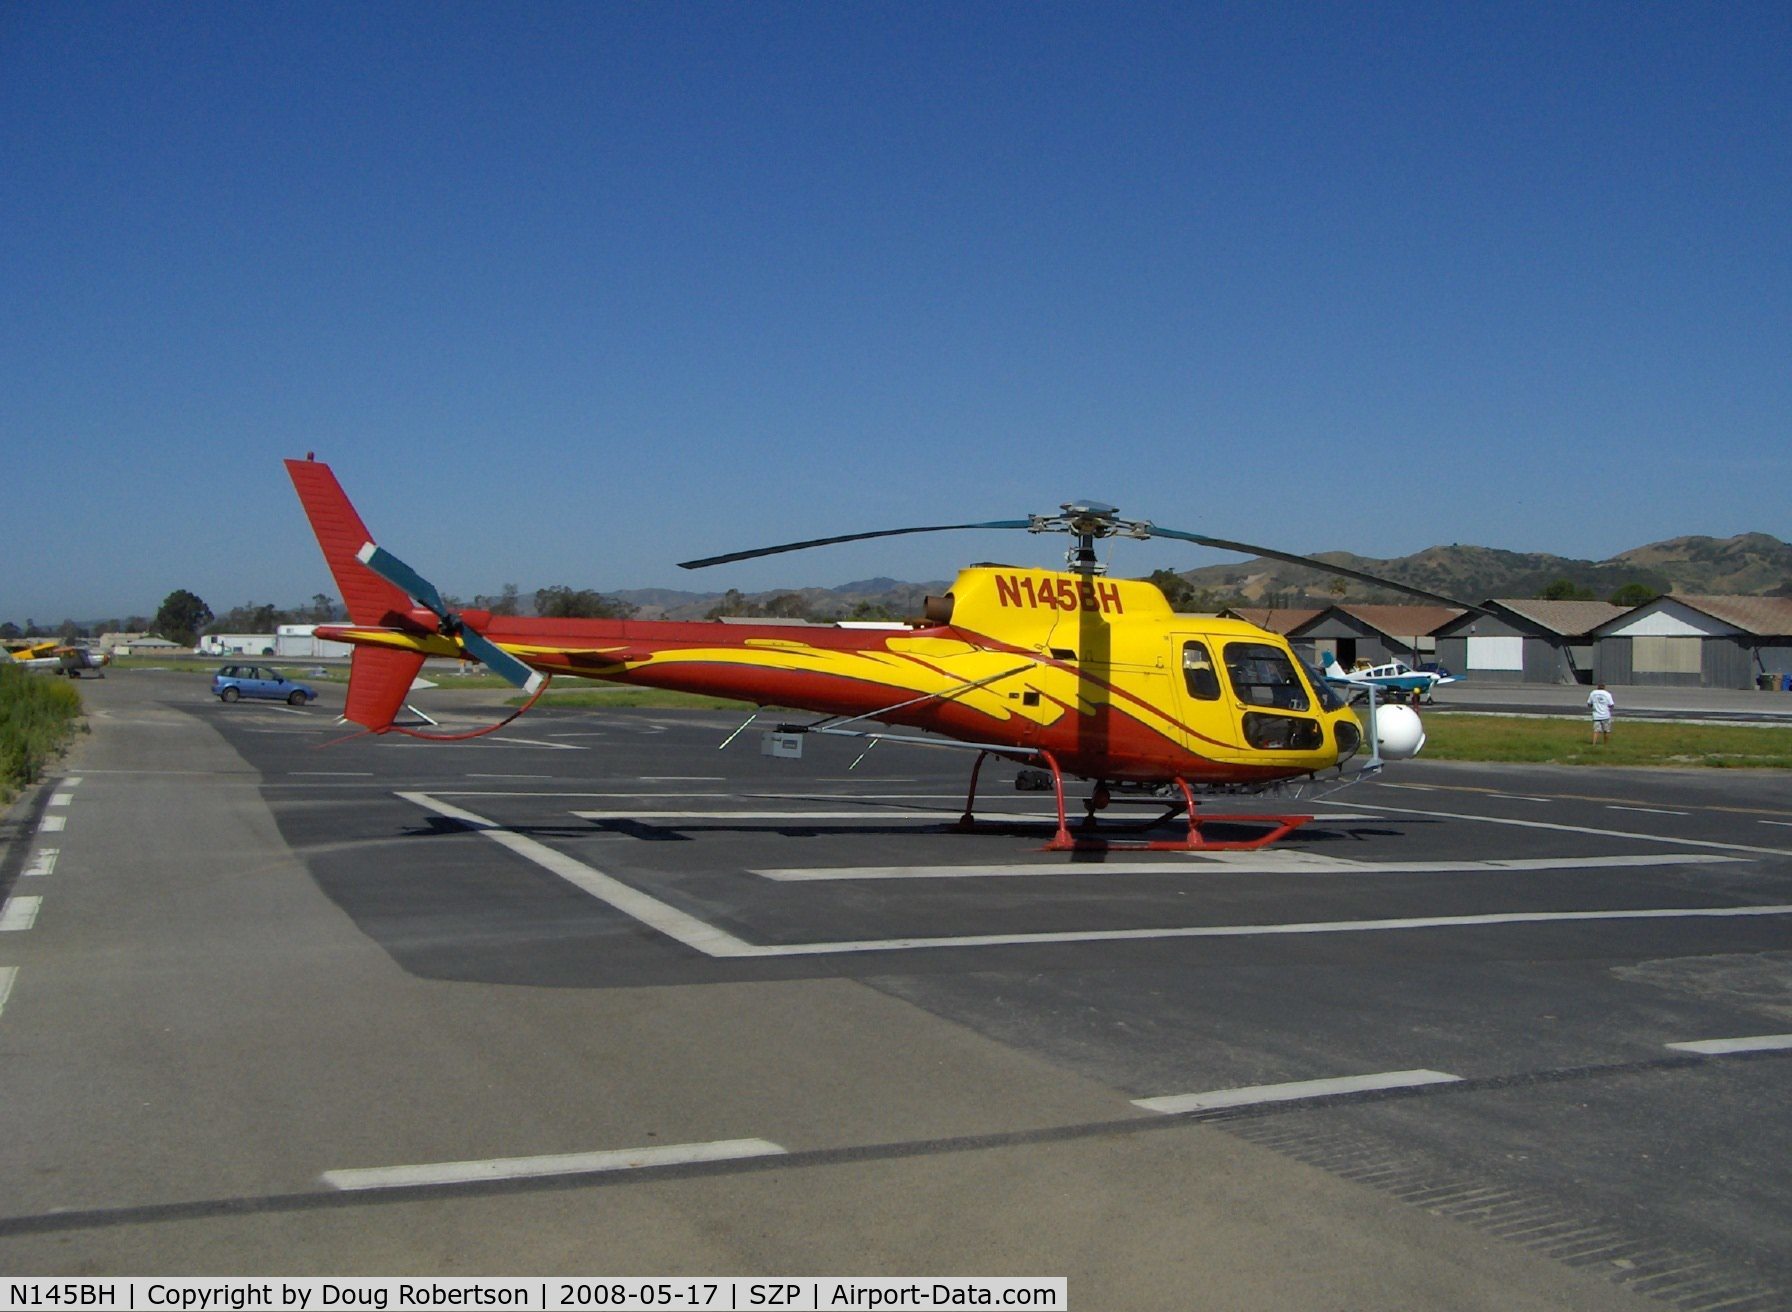 N145BH, 1980 Aerospatiale AS-350D AStar C/N 1270, 1980 Aerospatiale AS350D ASTAR, one Lycoming LTS 101 600A.2 616 shp turboshaft, PICTORVISION offers gyro-stabilized aerial cinemaphotography-'no wobblies'